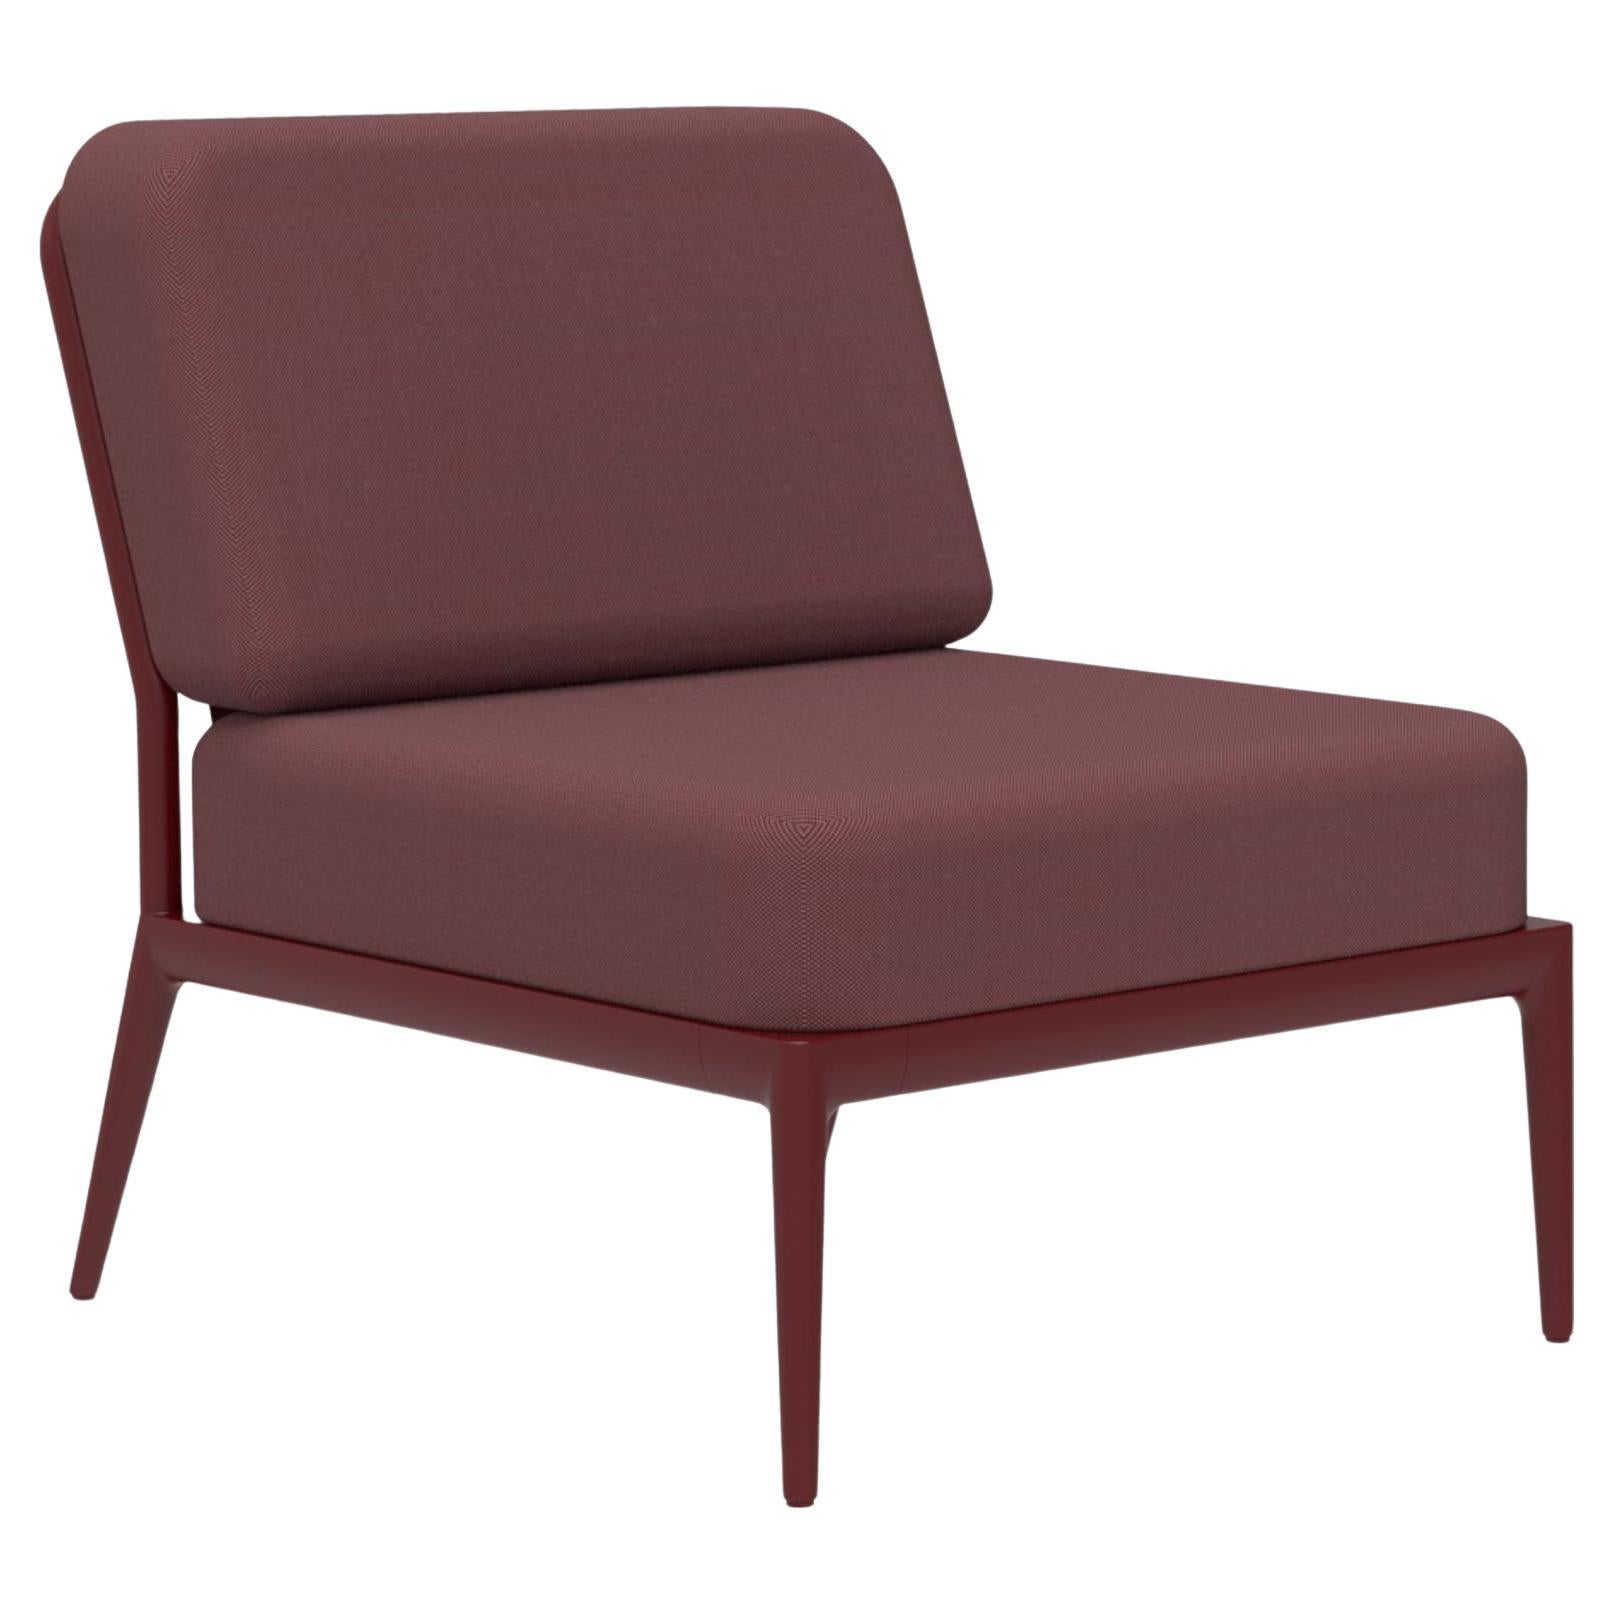 Ribbons Burgundy Central Modular Sofa by Mowee For Sale